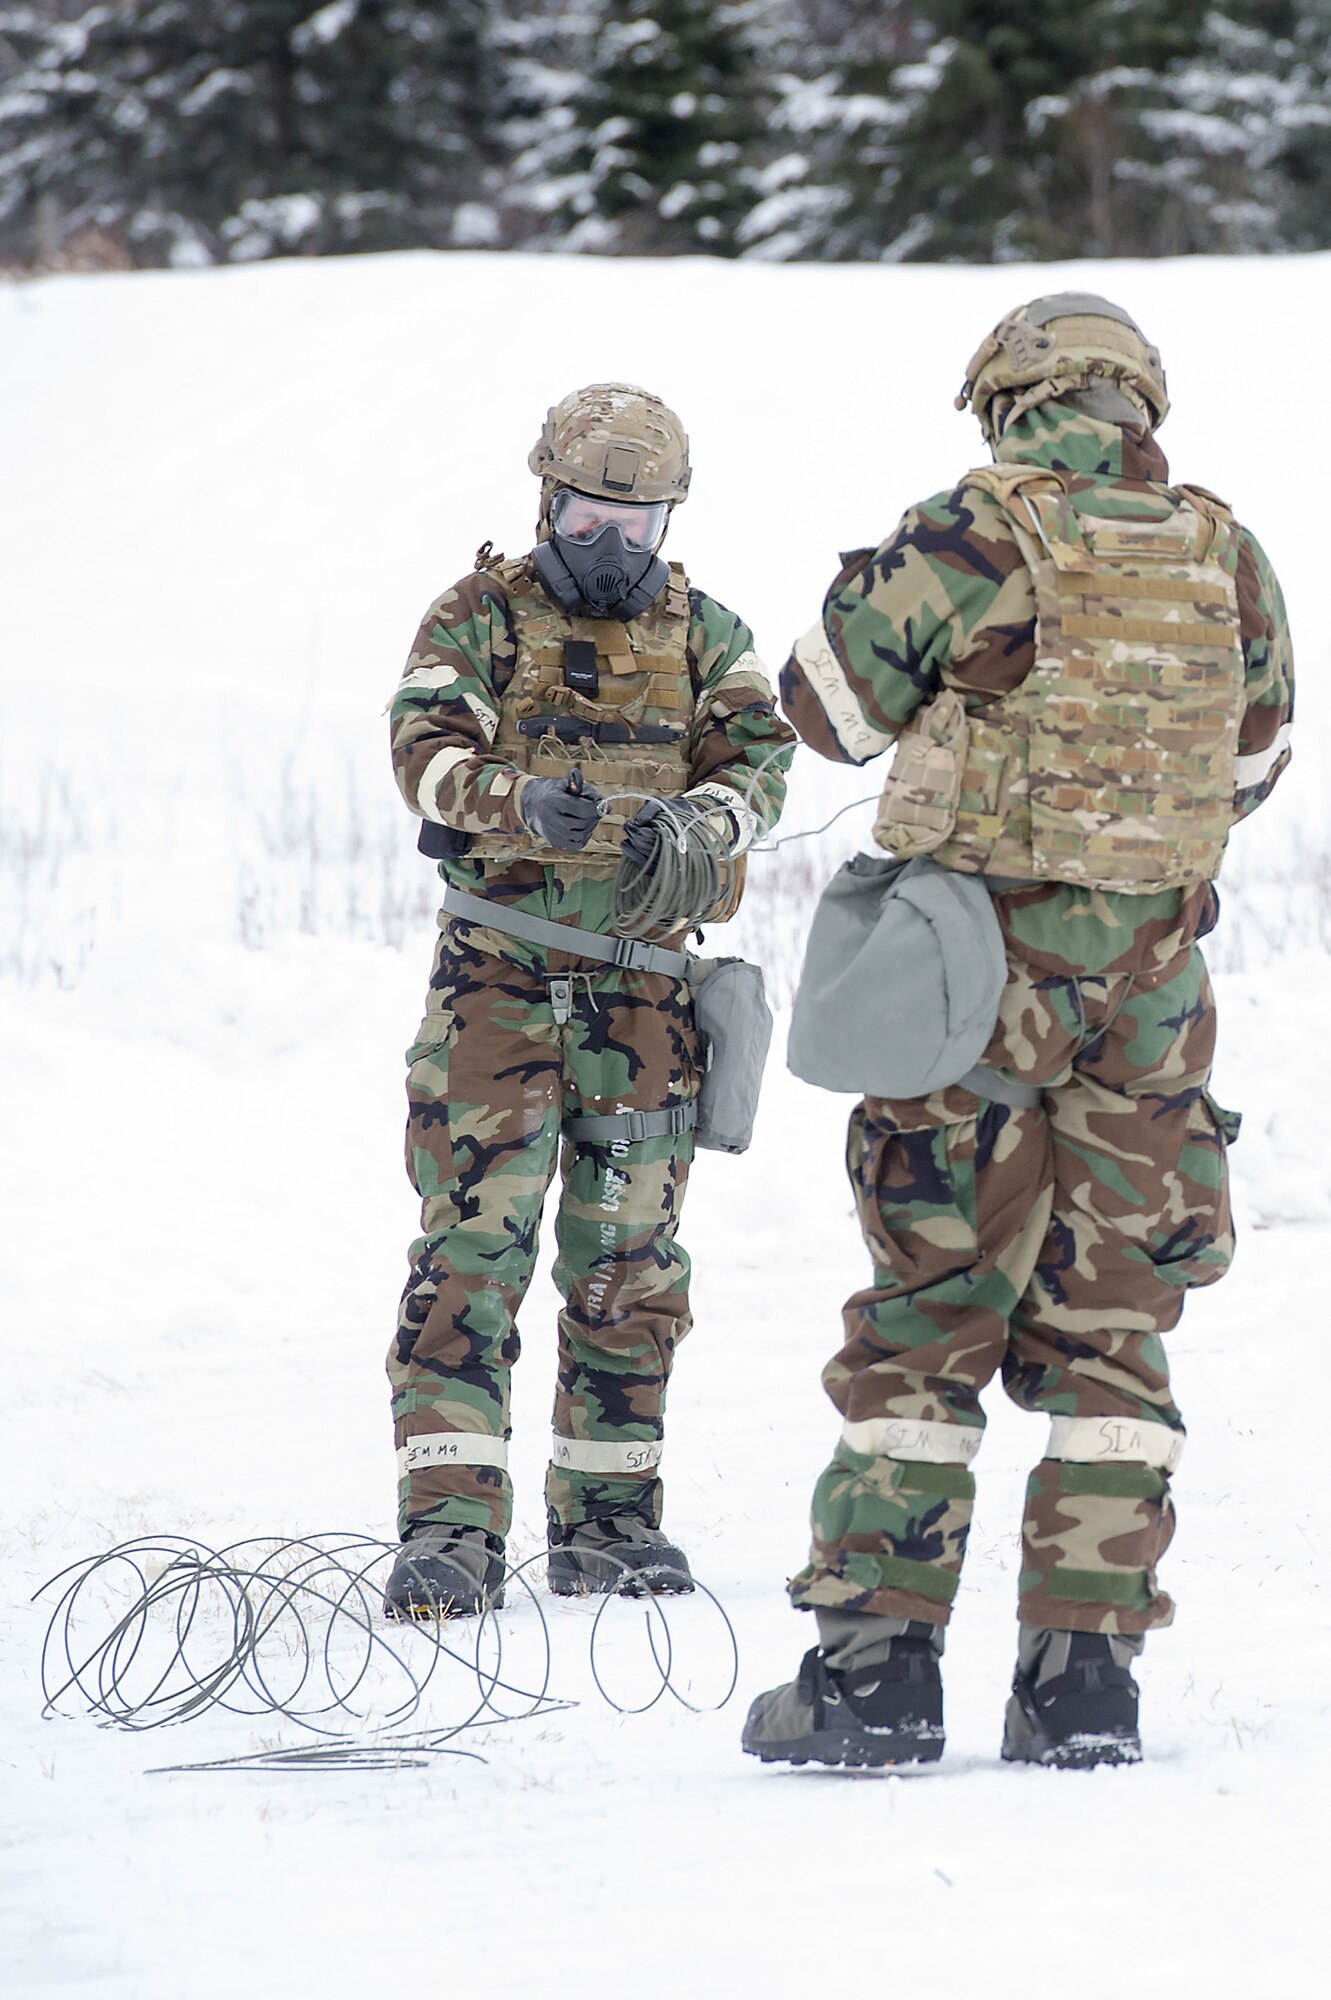 Airmen assigned to the 673d Civil Engineer Squadron, Explosives Ordinance Disposal Flight, handle detonation cord during a live-fire demolitions exercise in Mission Oriented Protective Posture 4 on Joint Base Elmendorf-Richardson, Alaska, Feb.14, 2018.  The Airmen were conducting EOD training in a simulated chemical weapons contaminated environment.